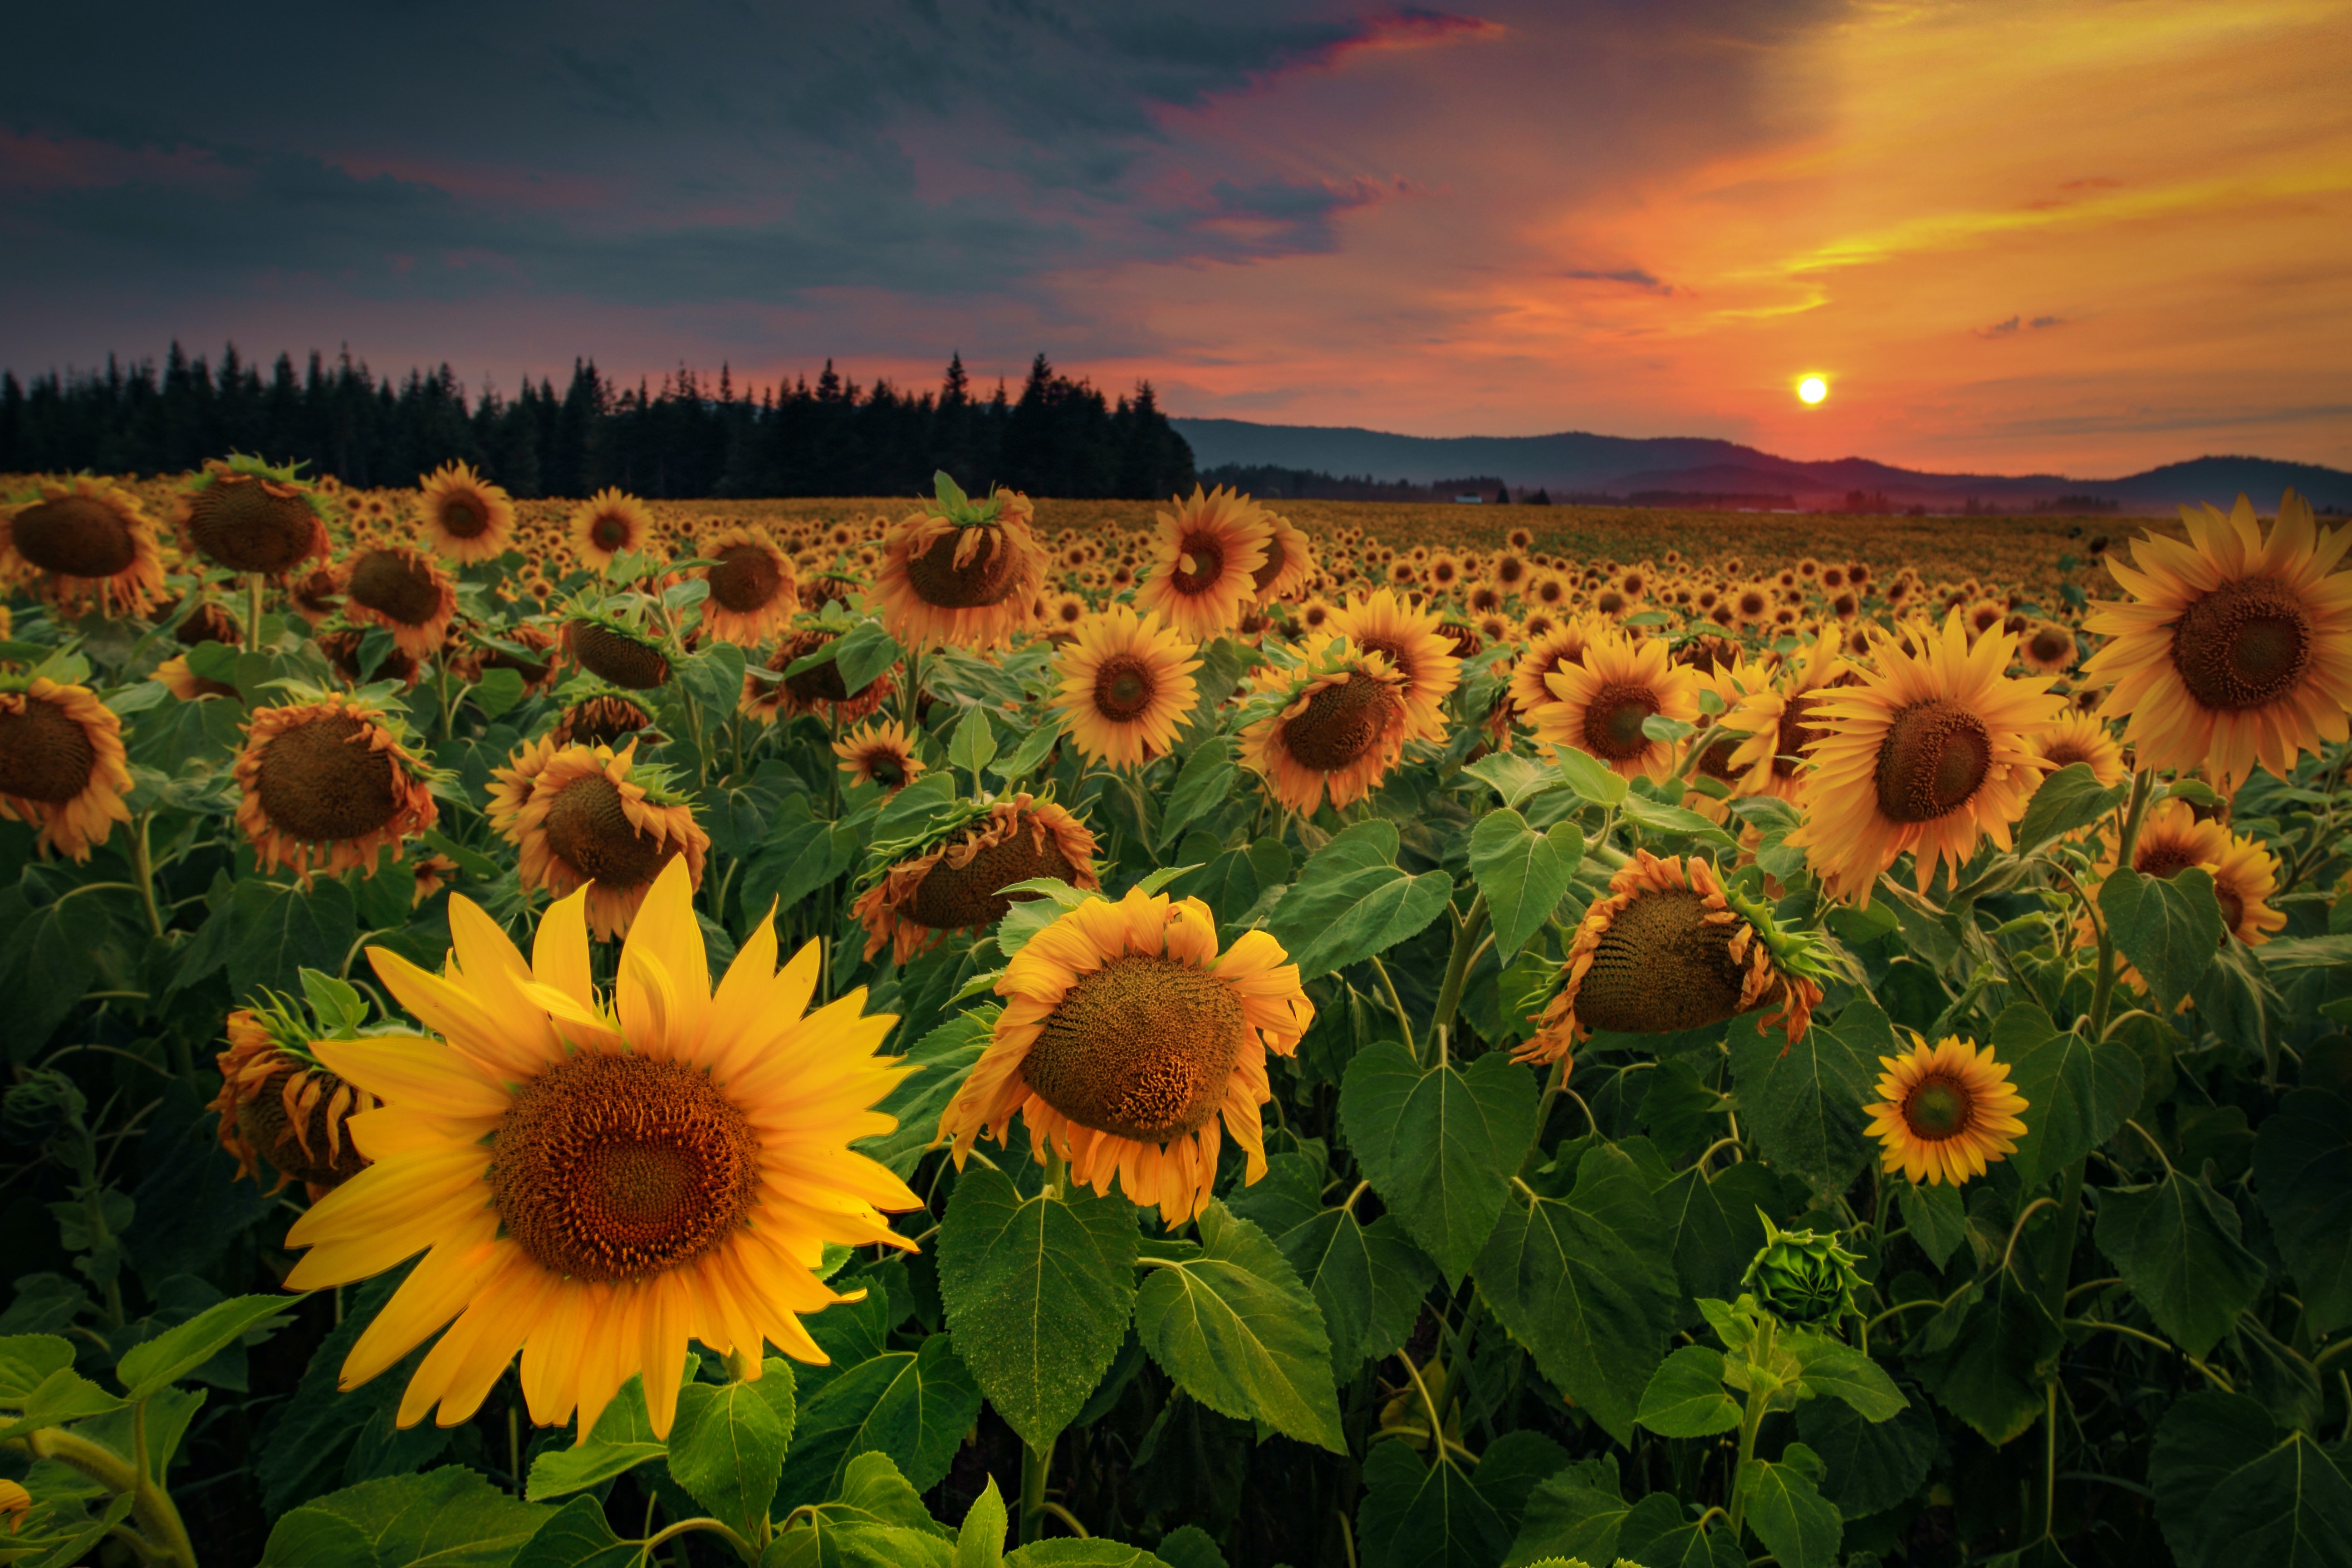 87802 download wallpaper flowers, sunflowers, forest, field screensavers and pictures for free